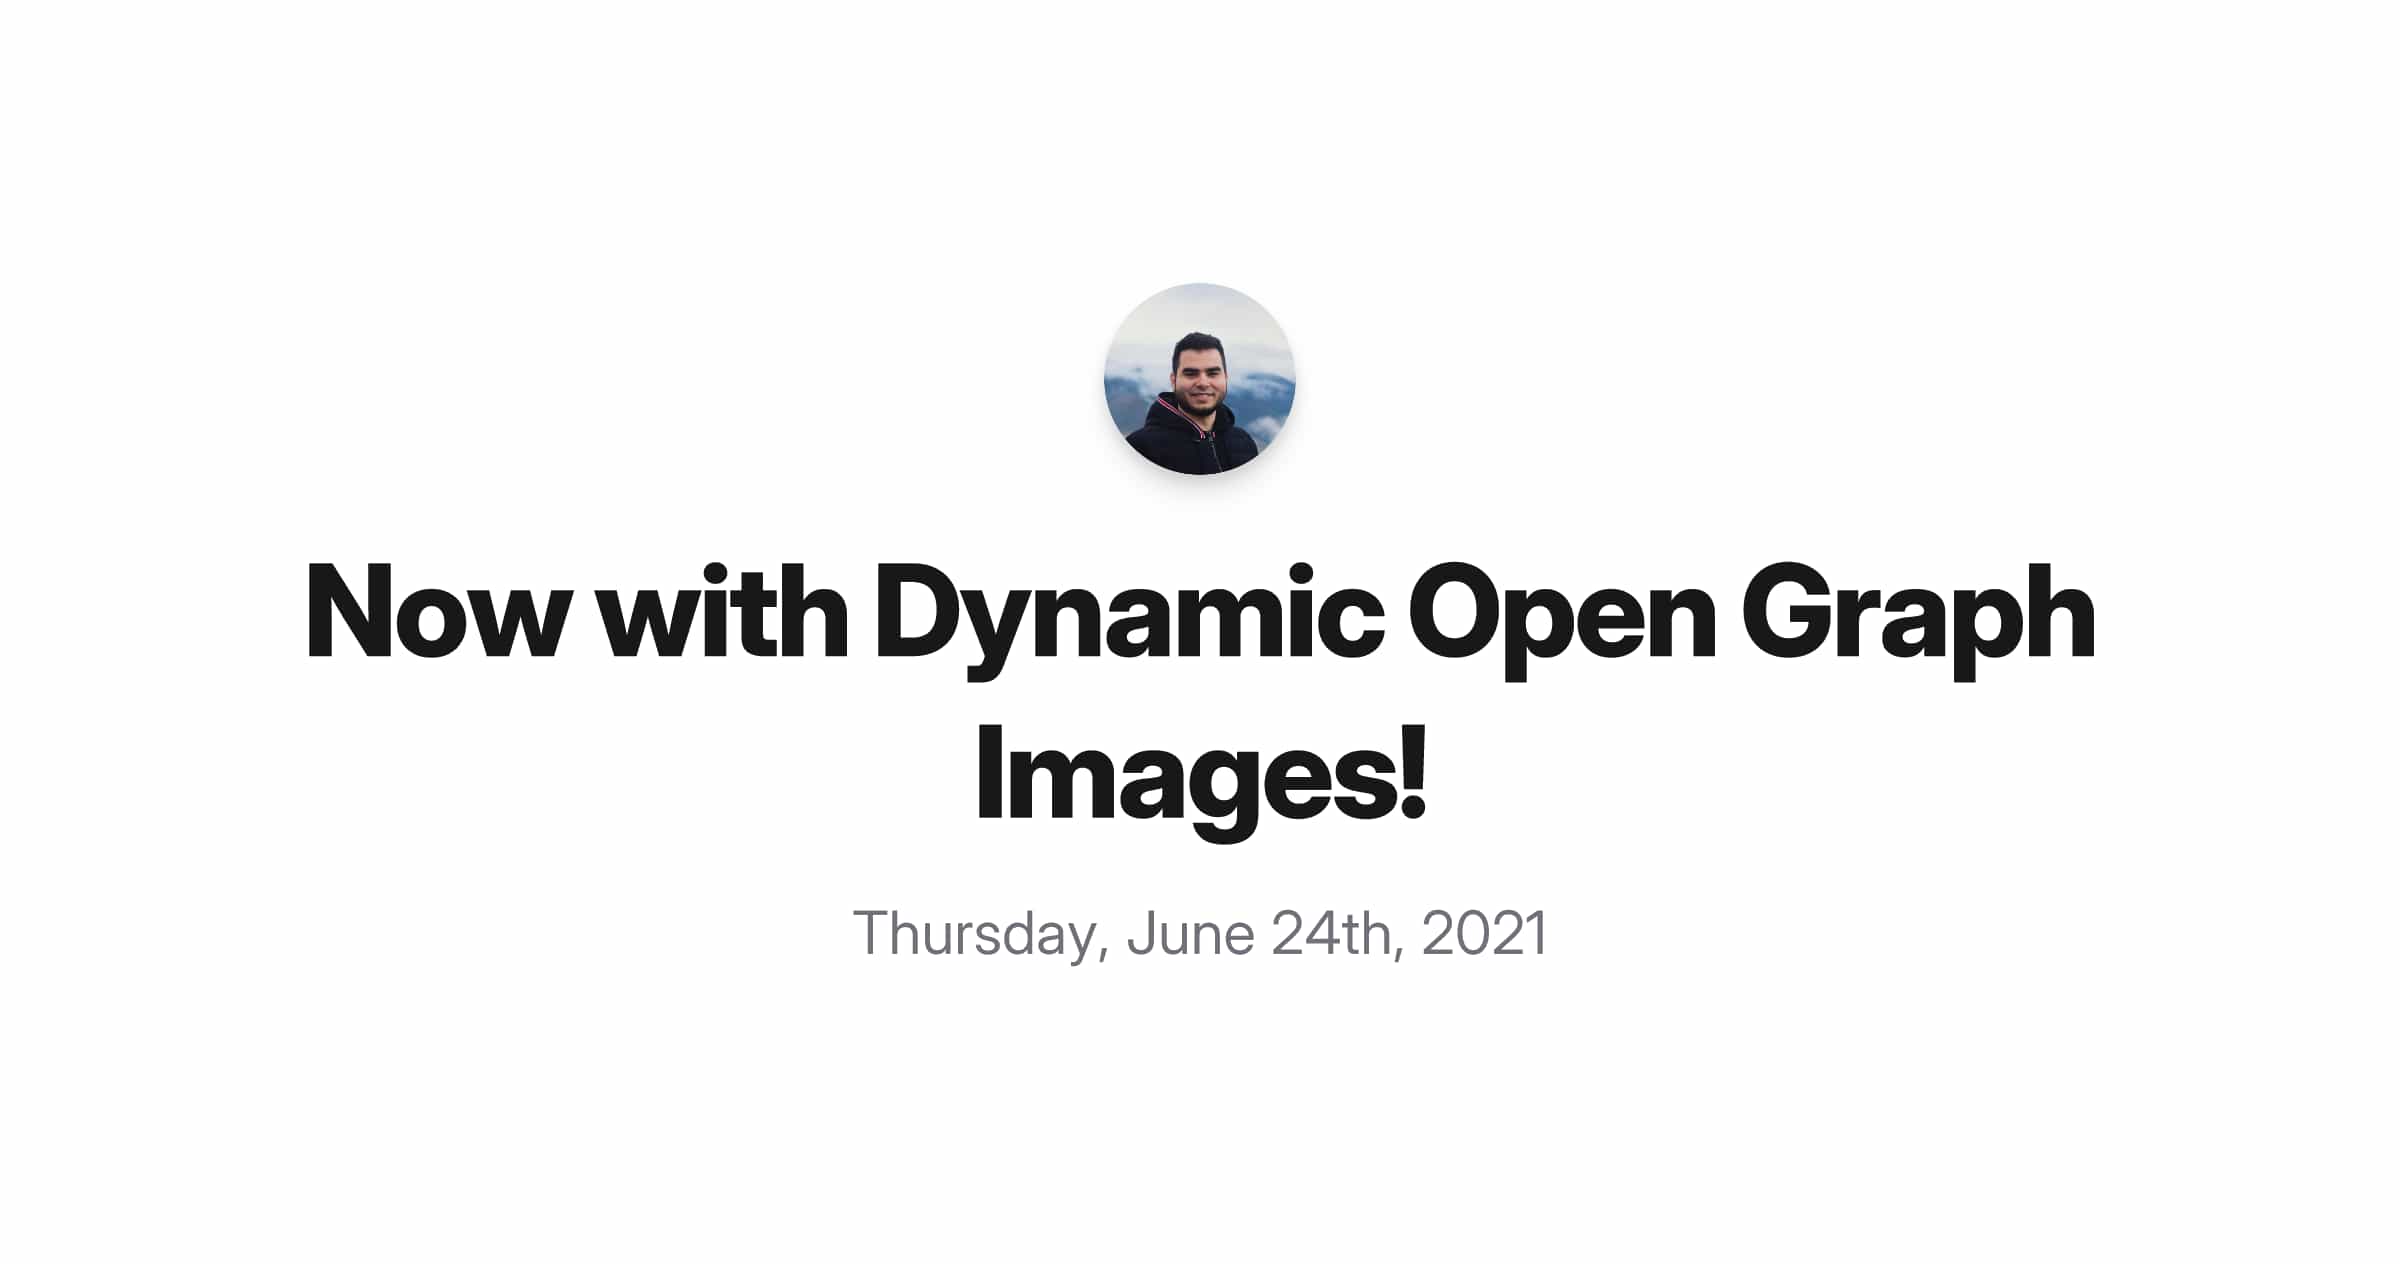 Dynamically-generated image shows the title of this post, "Now With Dynamic Open Graph Images!" in large bold font. Above the title is the date when it was published, Thursday, June 24th, 2021